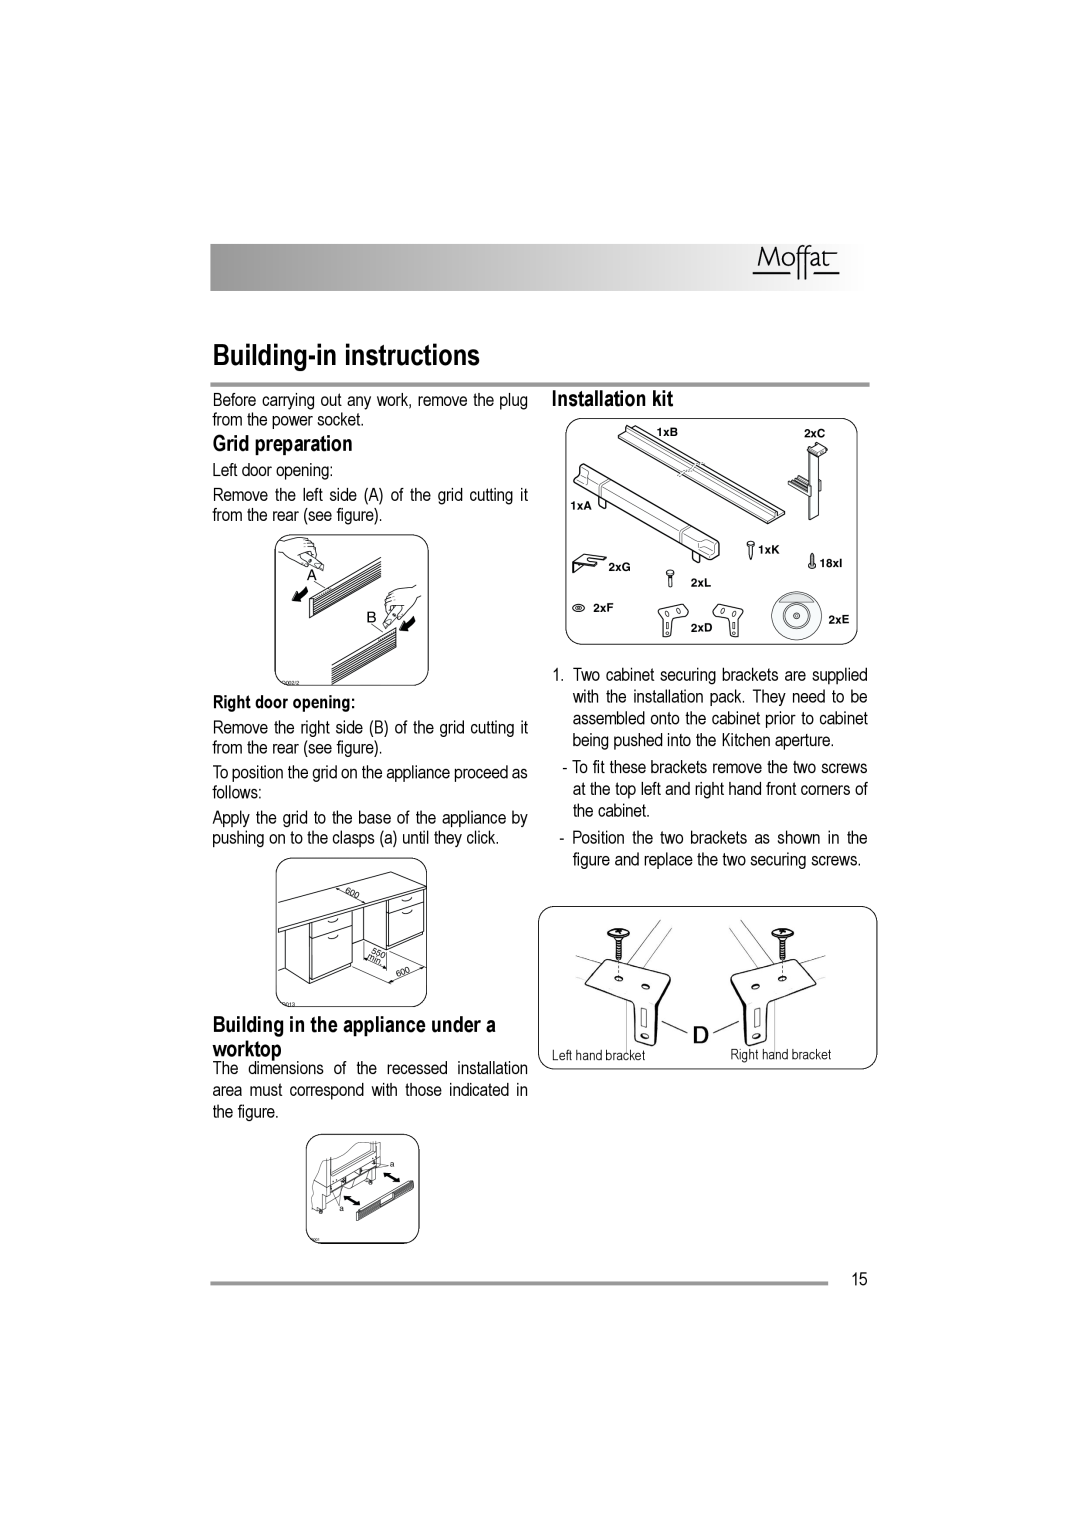 Moffat MUL 514 Building-ininstructions, Grid preparation, Installation kit, Building in the appliance under a worktop 